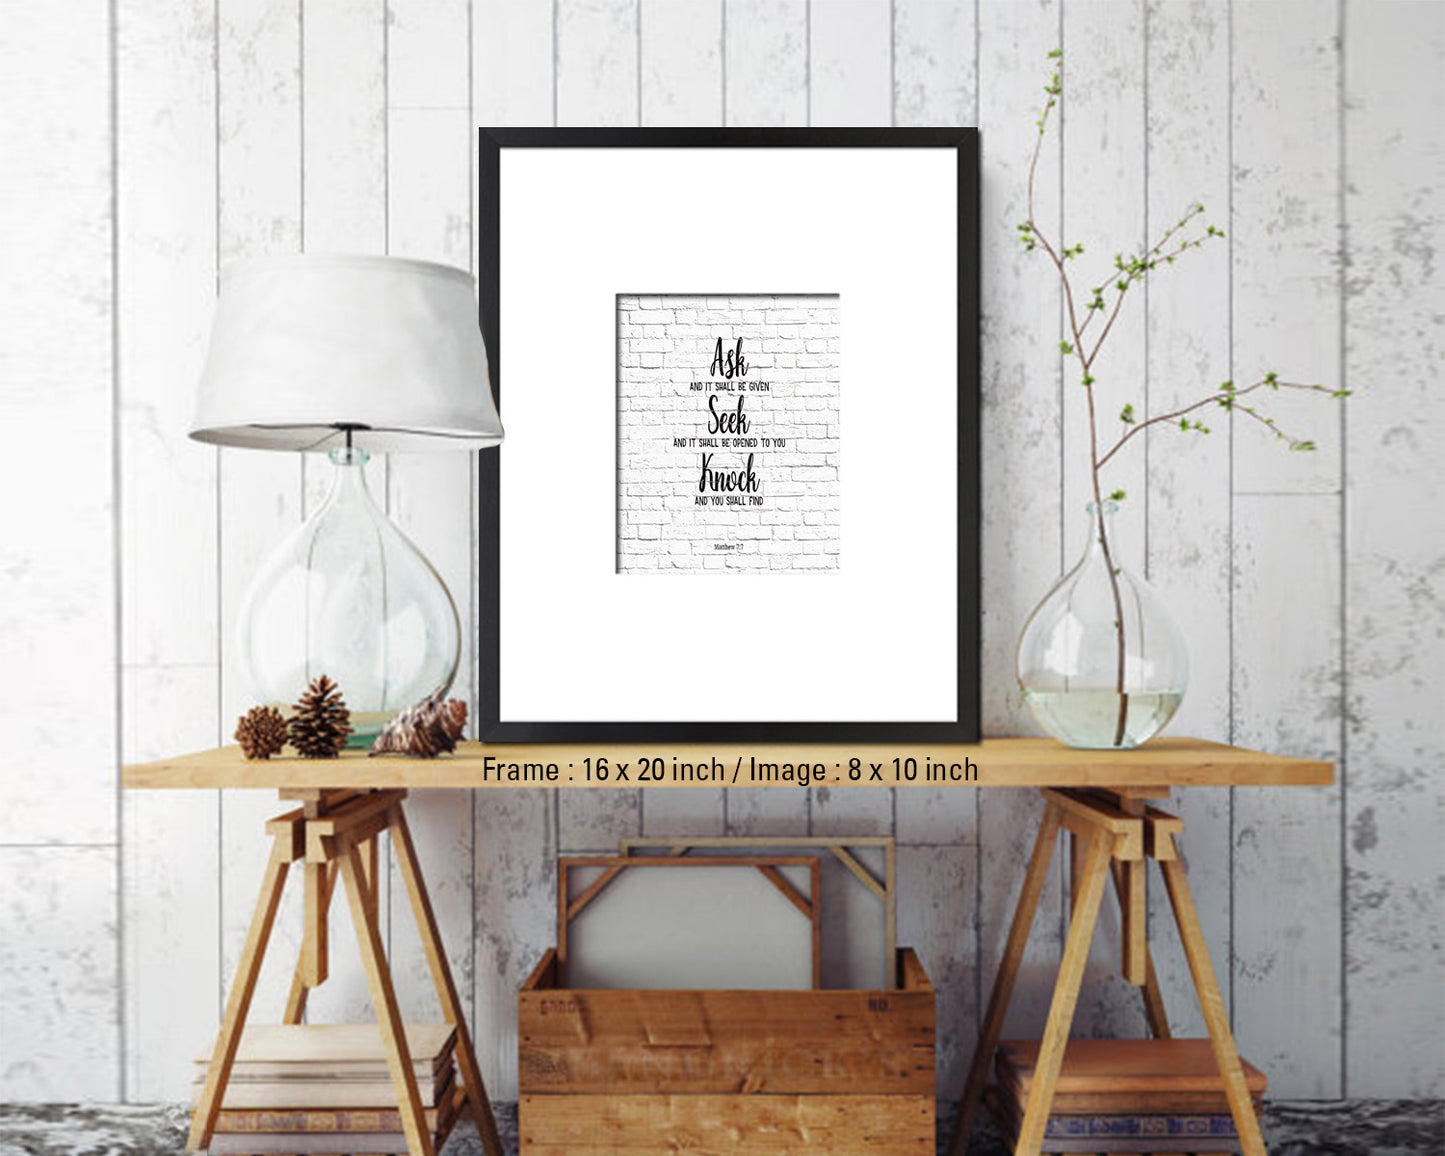 Seek and You Shall Find, Matthew 7:7 Quote Framed Print Home Decor Wall Art Gifts